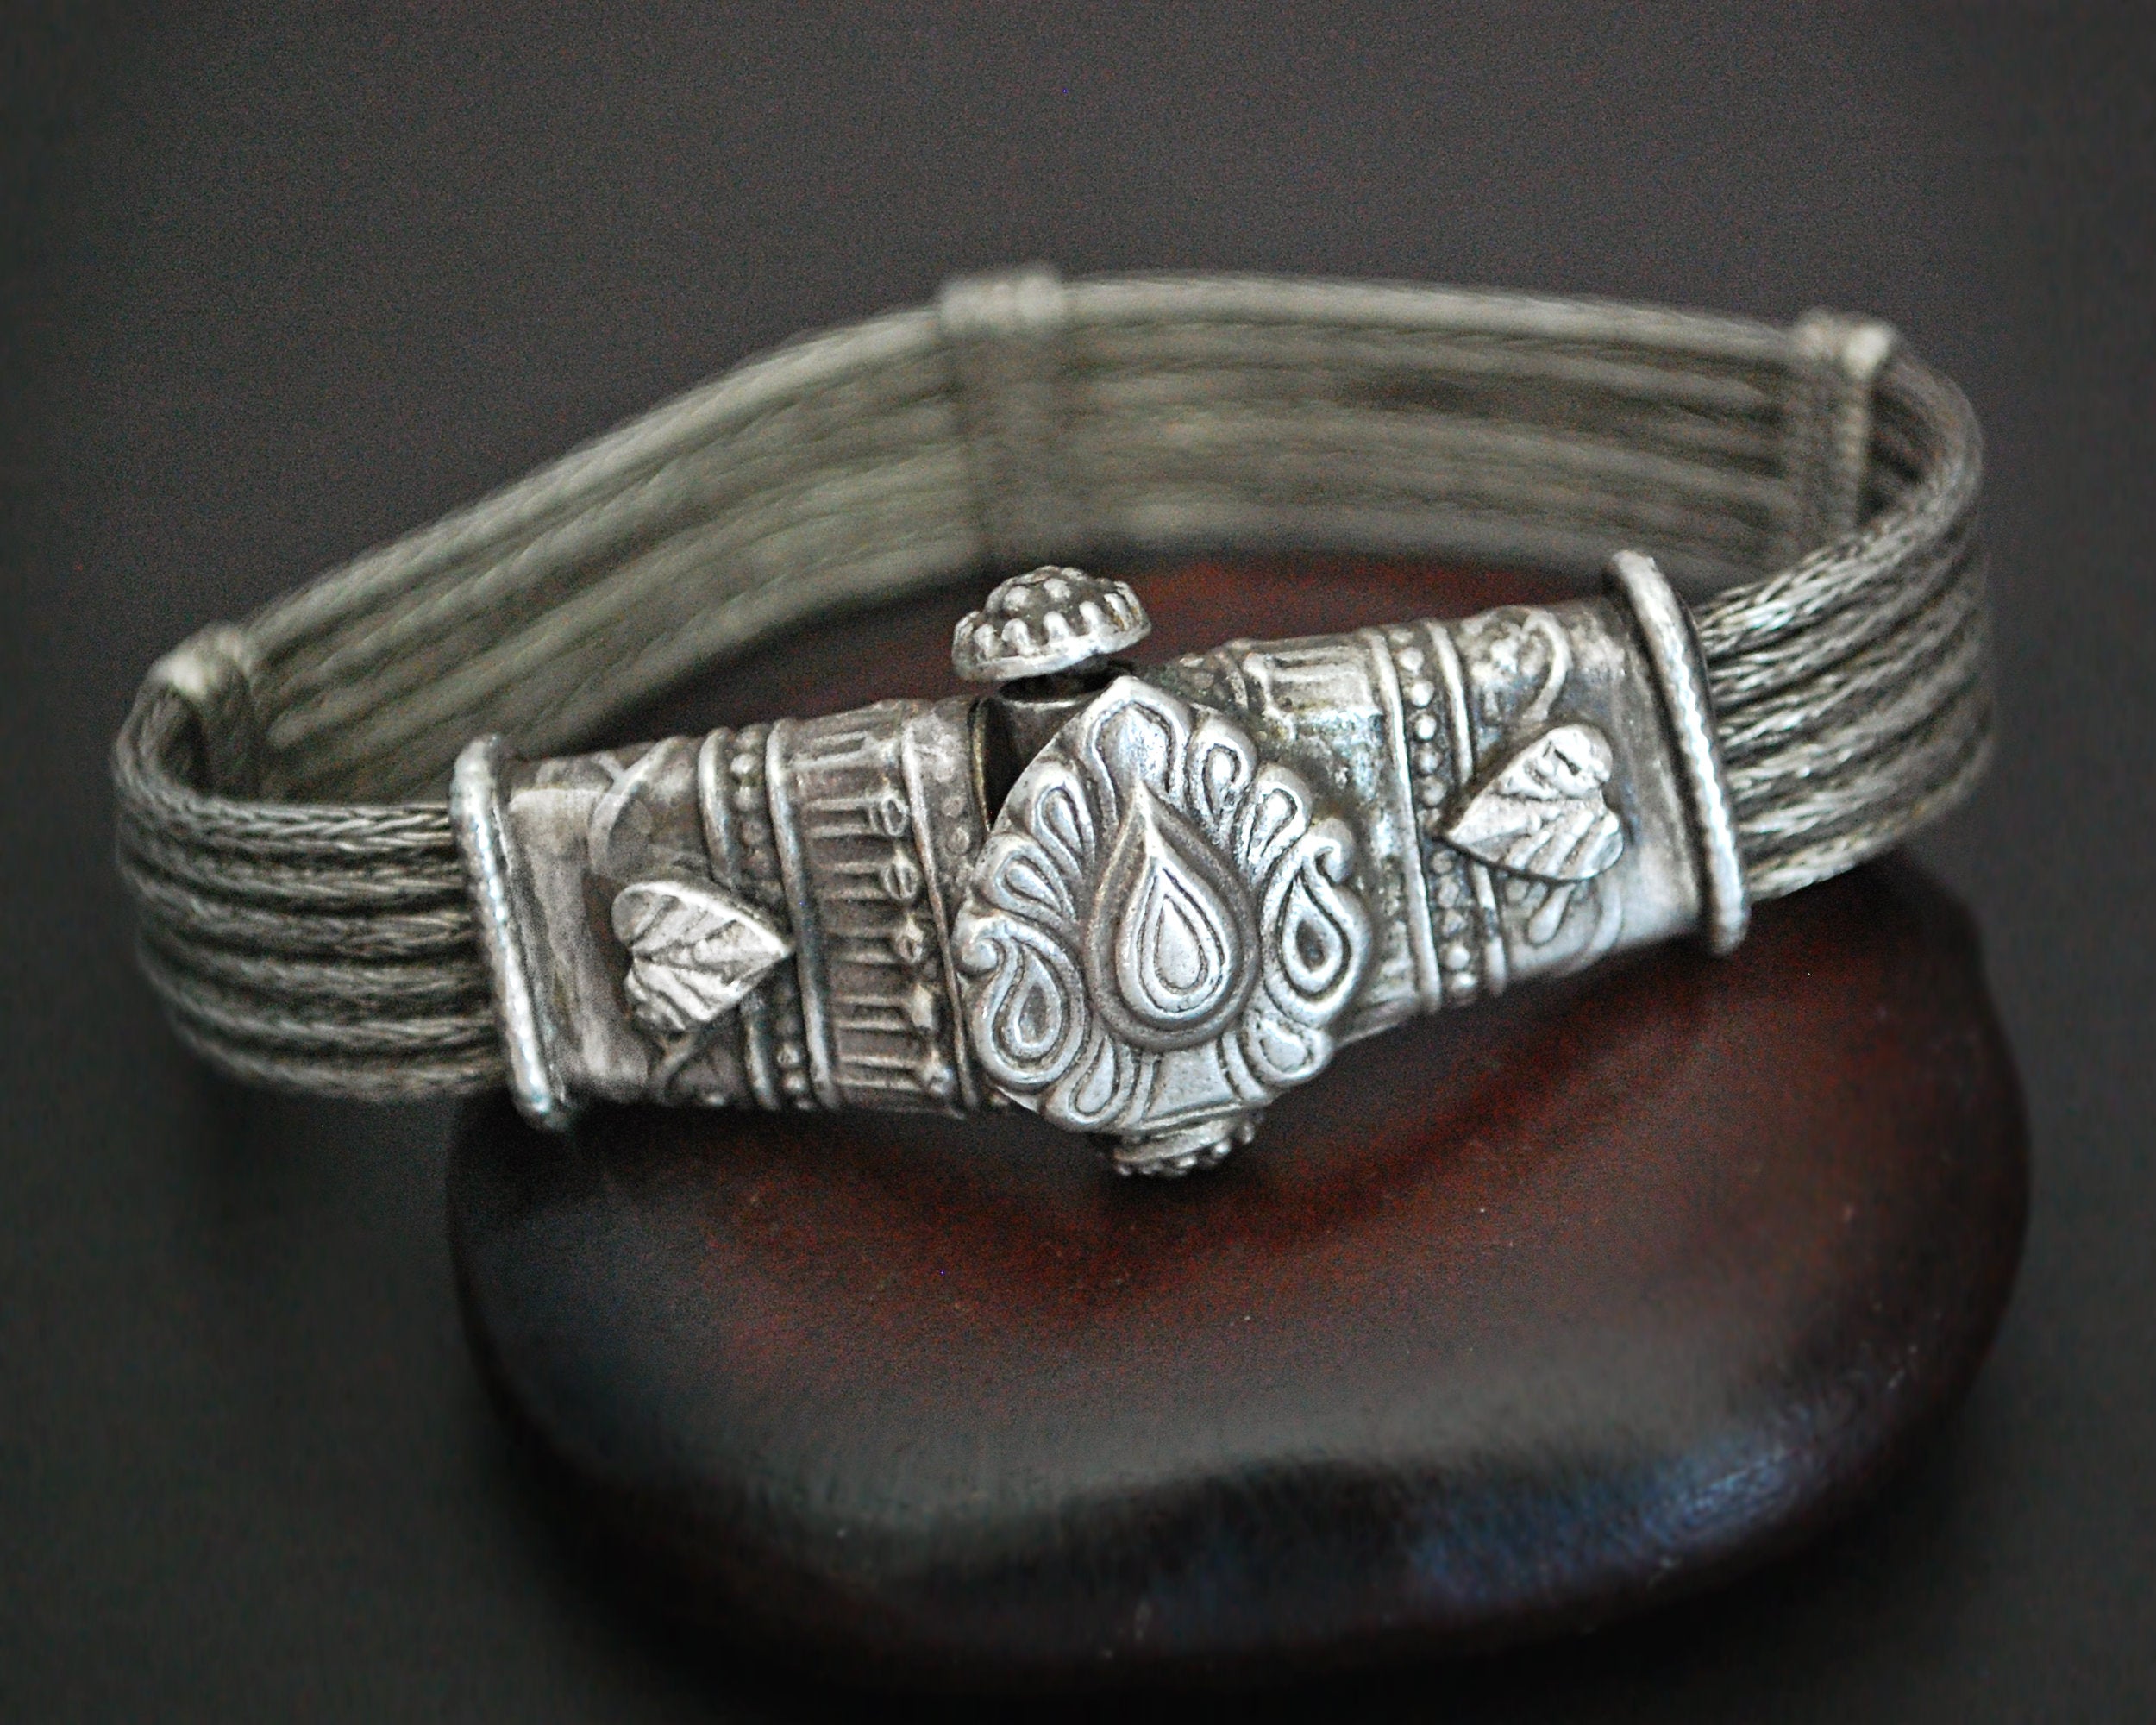 Rajasthani Silver Snake Chain Bracelet with Screw Closure